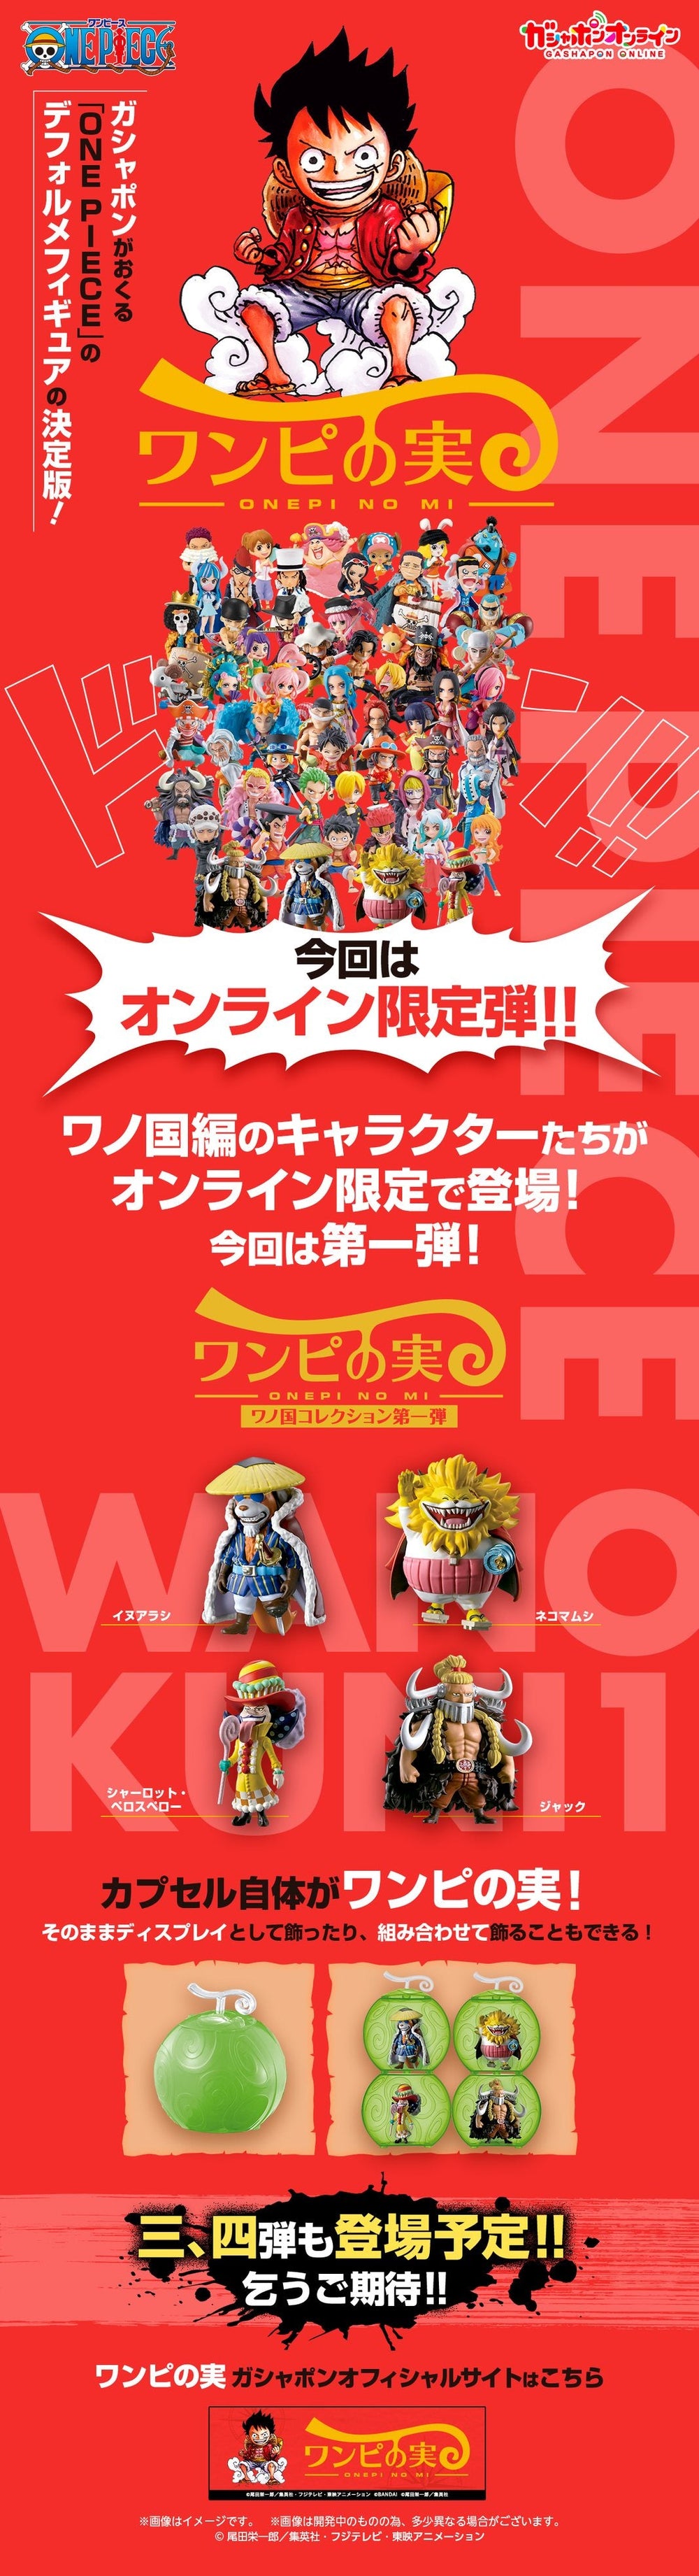 PREORDER Onepi no Mi Wano Country Collection 1
Set of 4